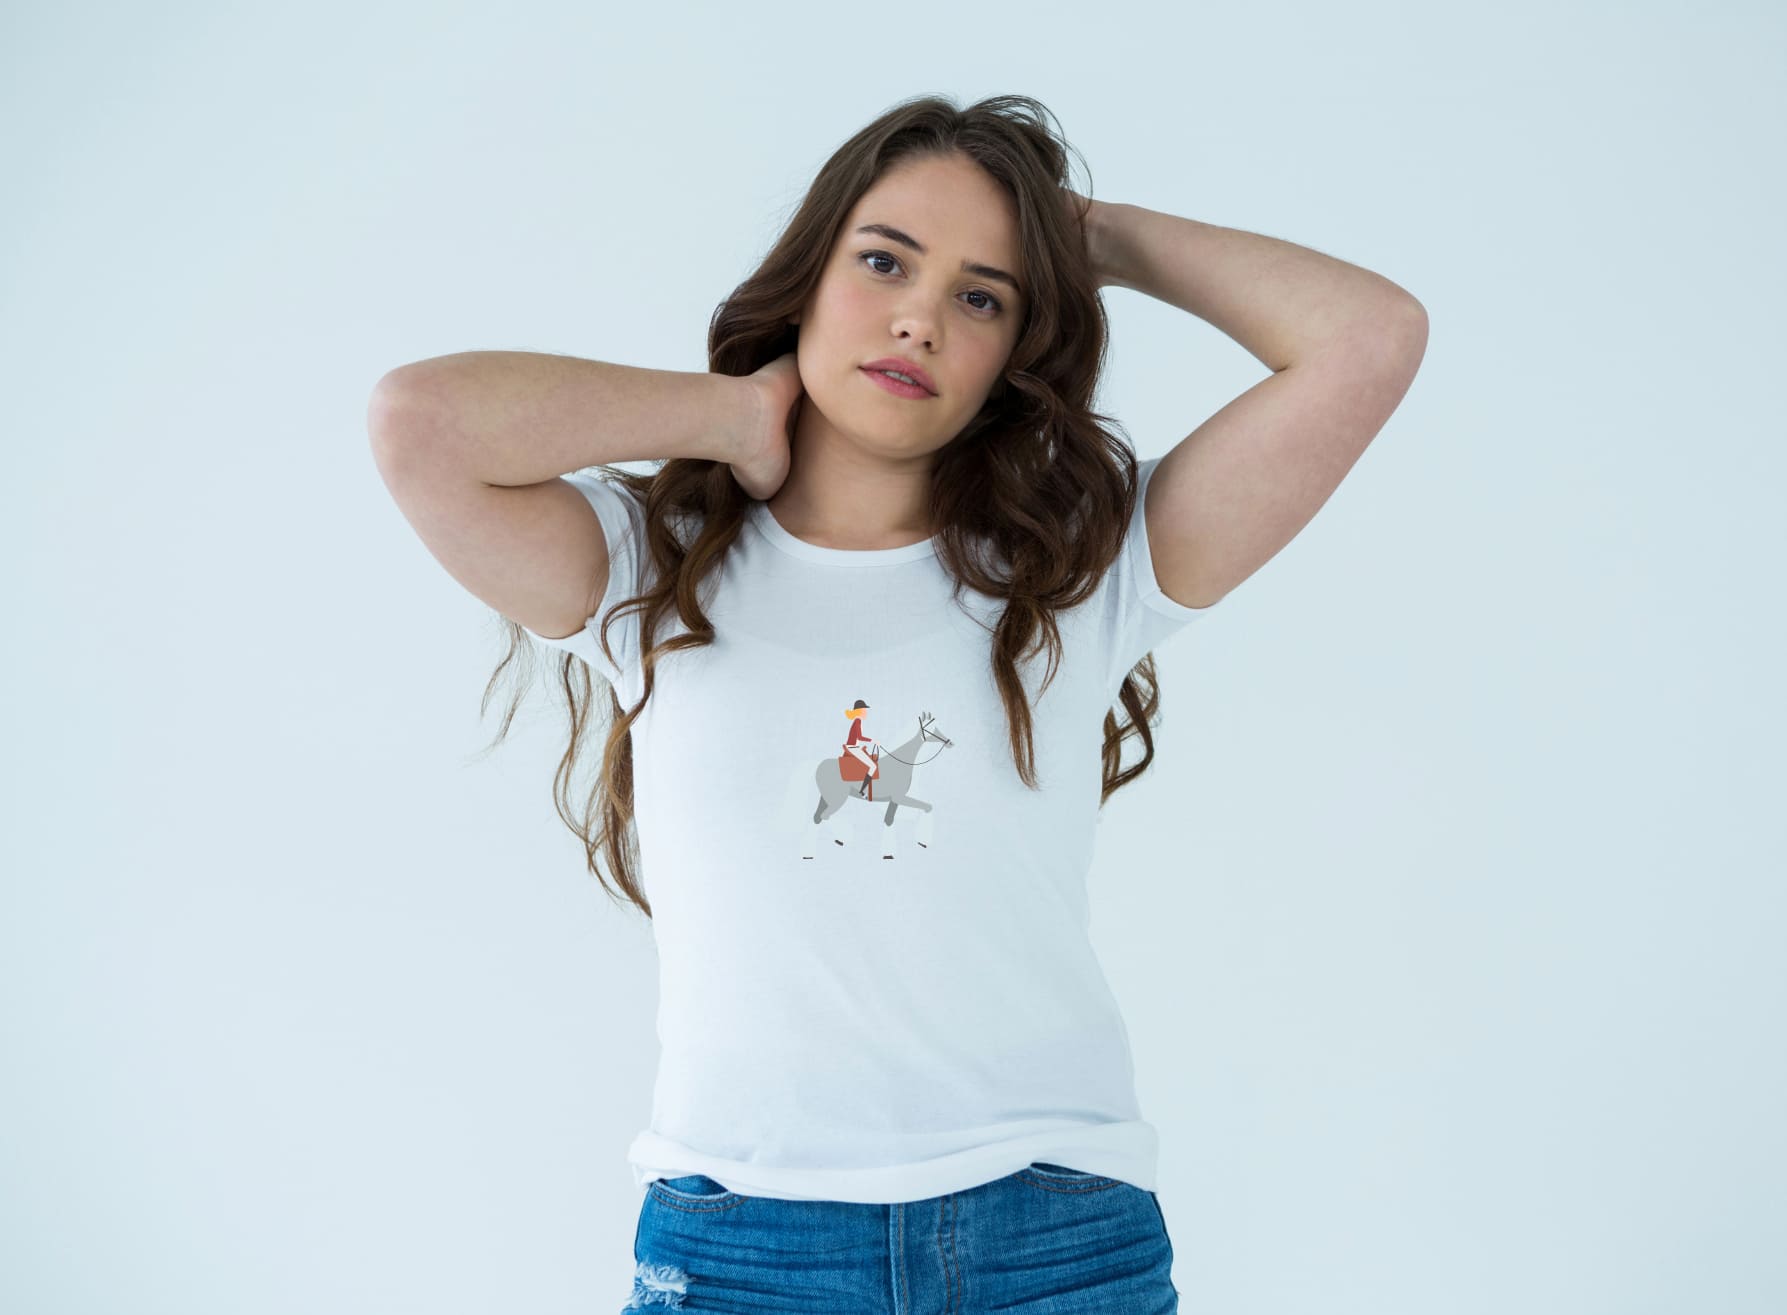 White t-shirt with an image of a light gray horse riding, on a girl on a light blue background.